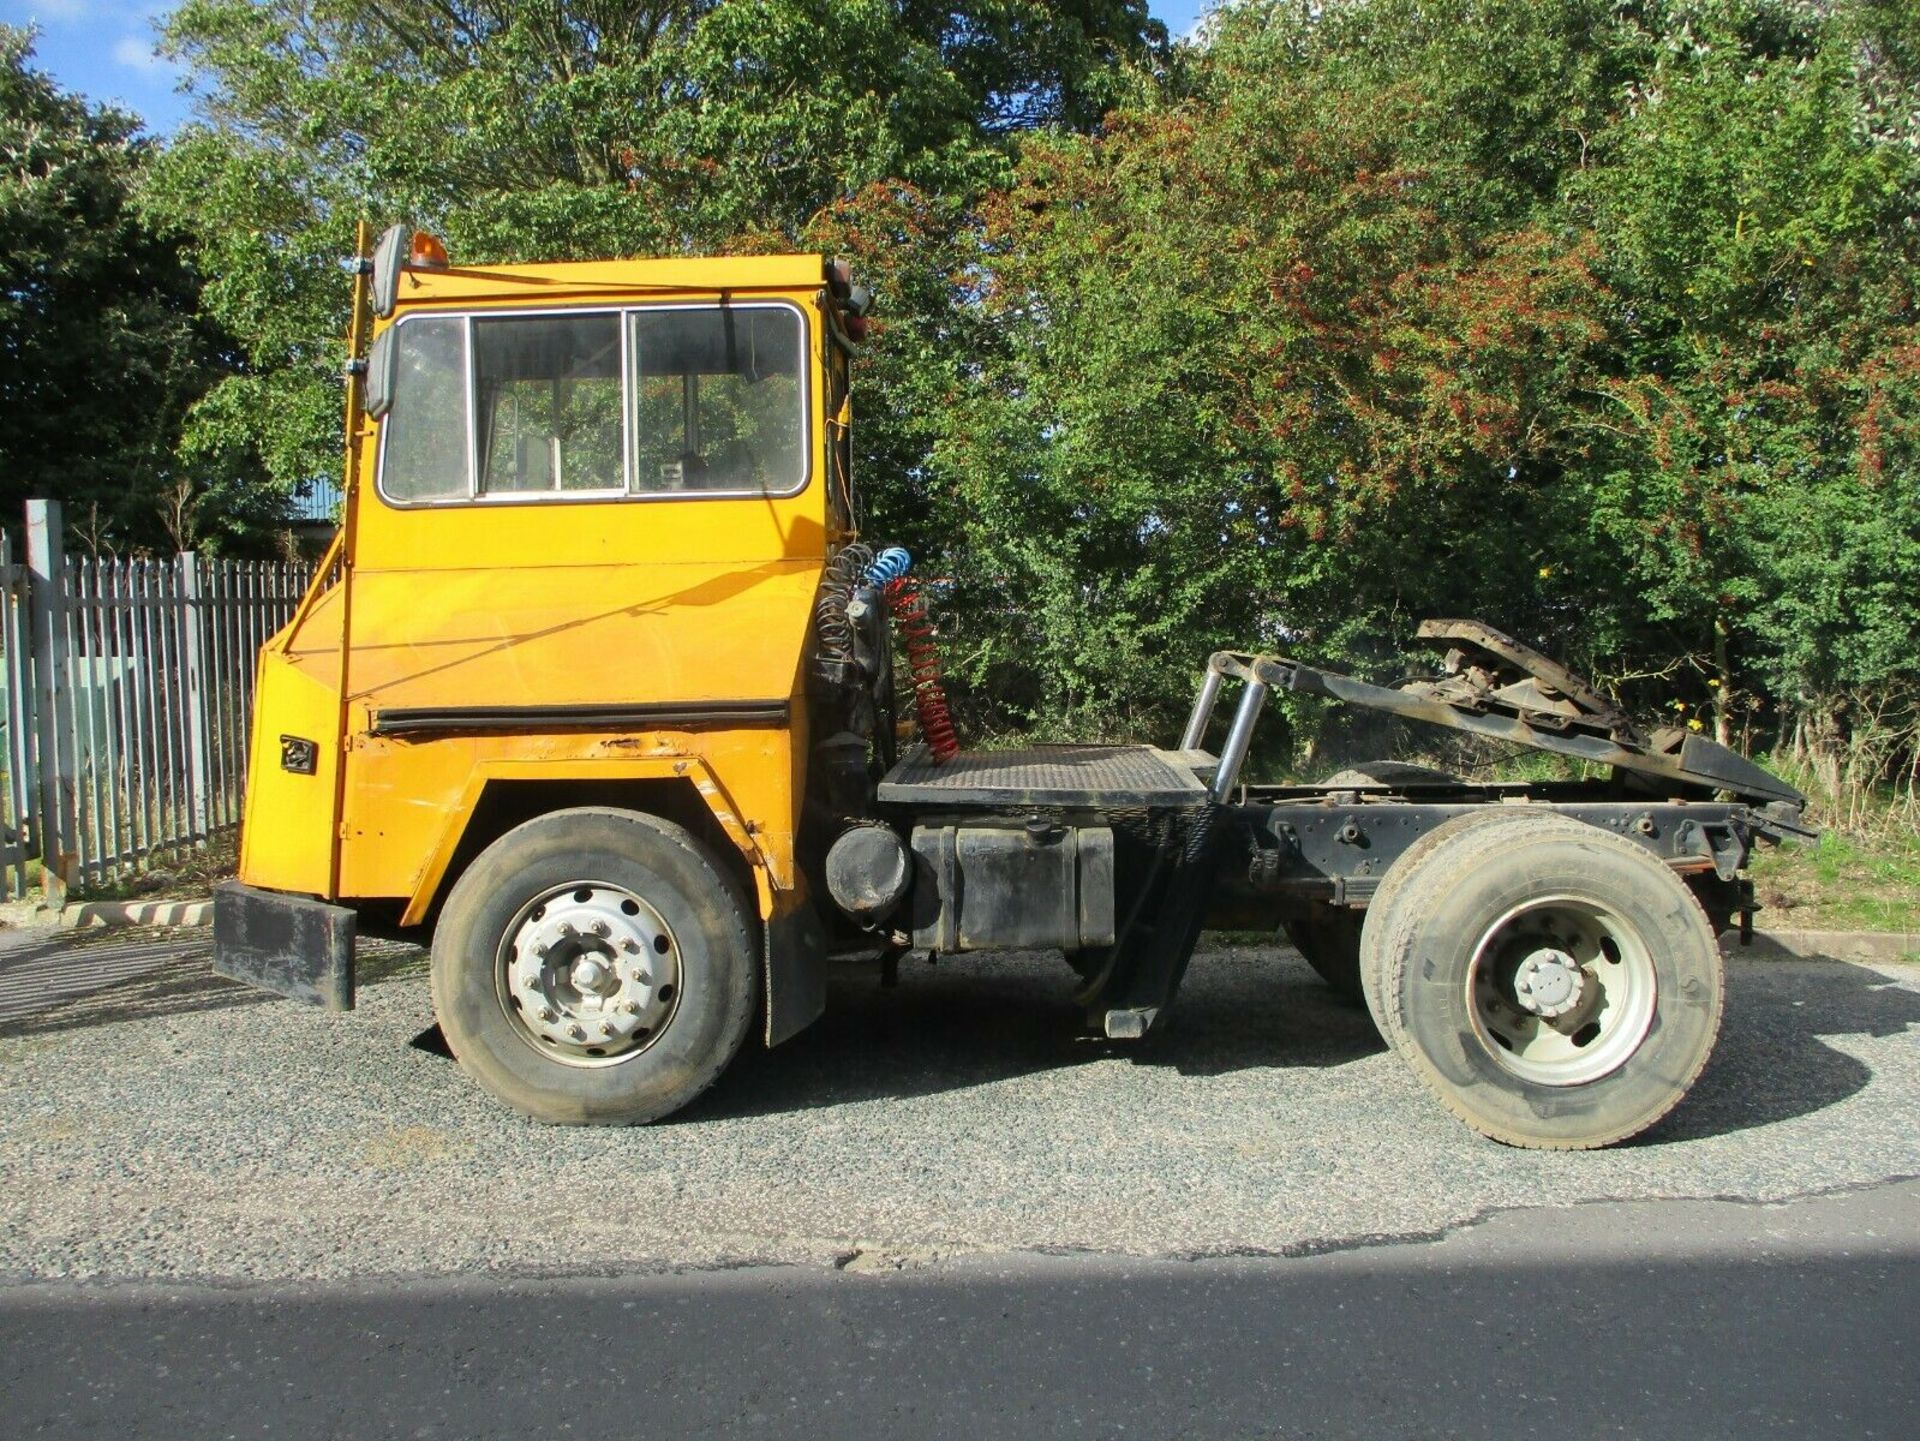 Reliance Dock spotter shunter tow tug tractor unit - Image 3 of 11